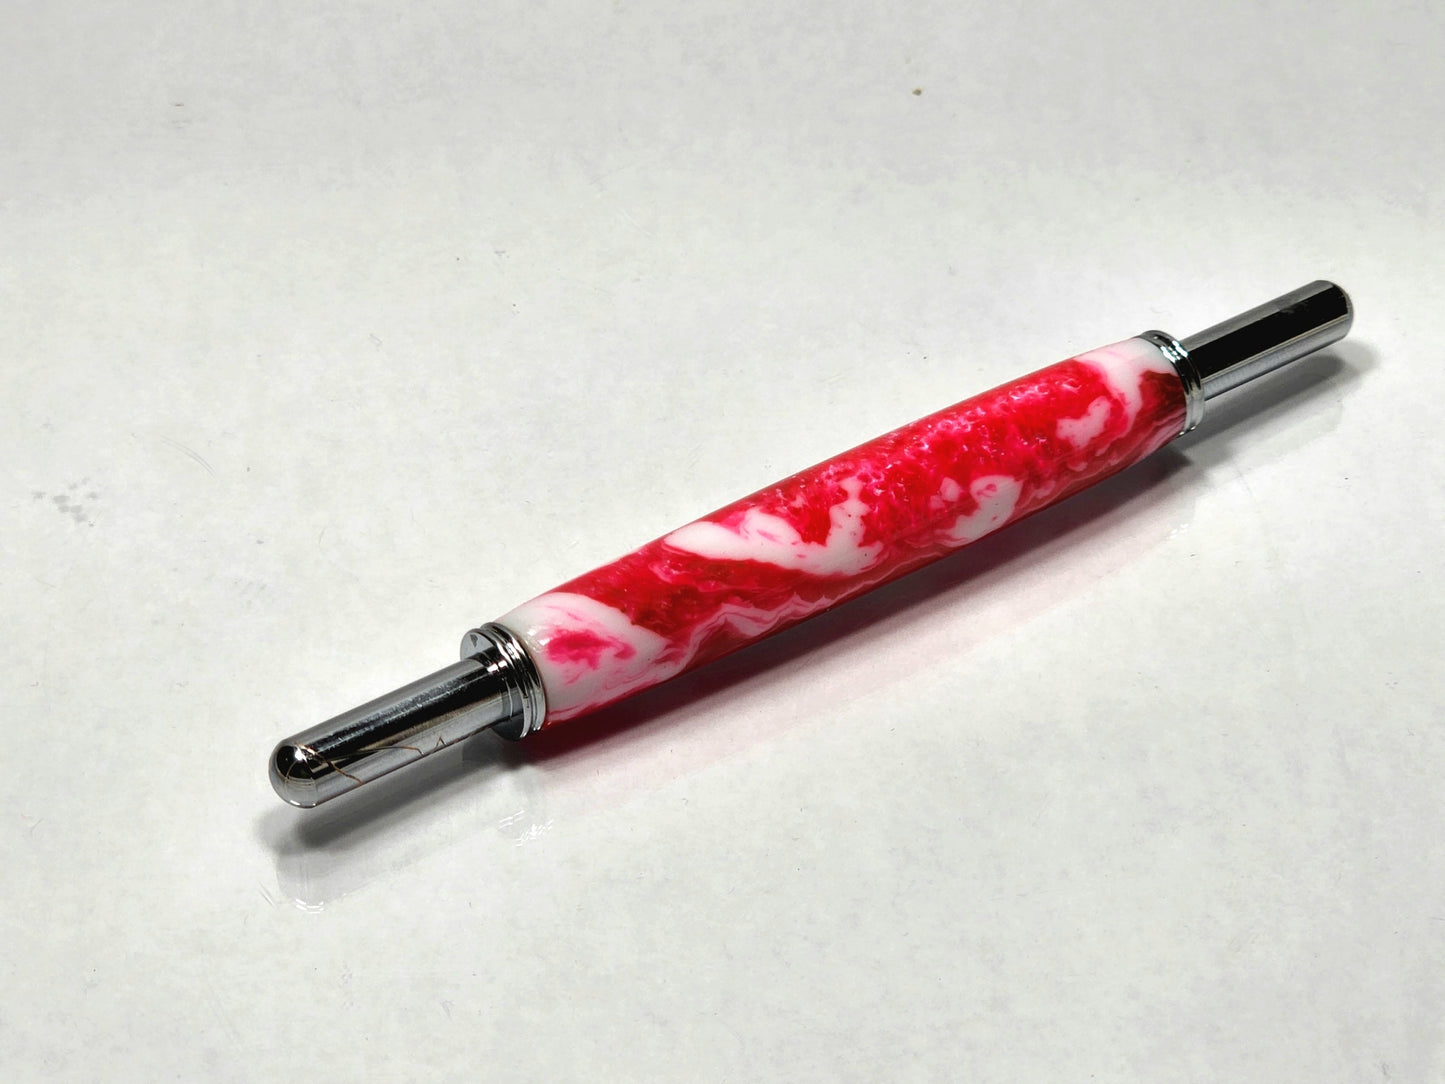 Handcrafted Double-Bladed Seam Ripper - Precision Tool for Sewing & Quilting